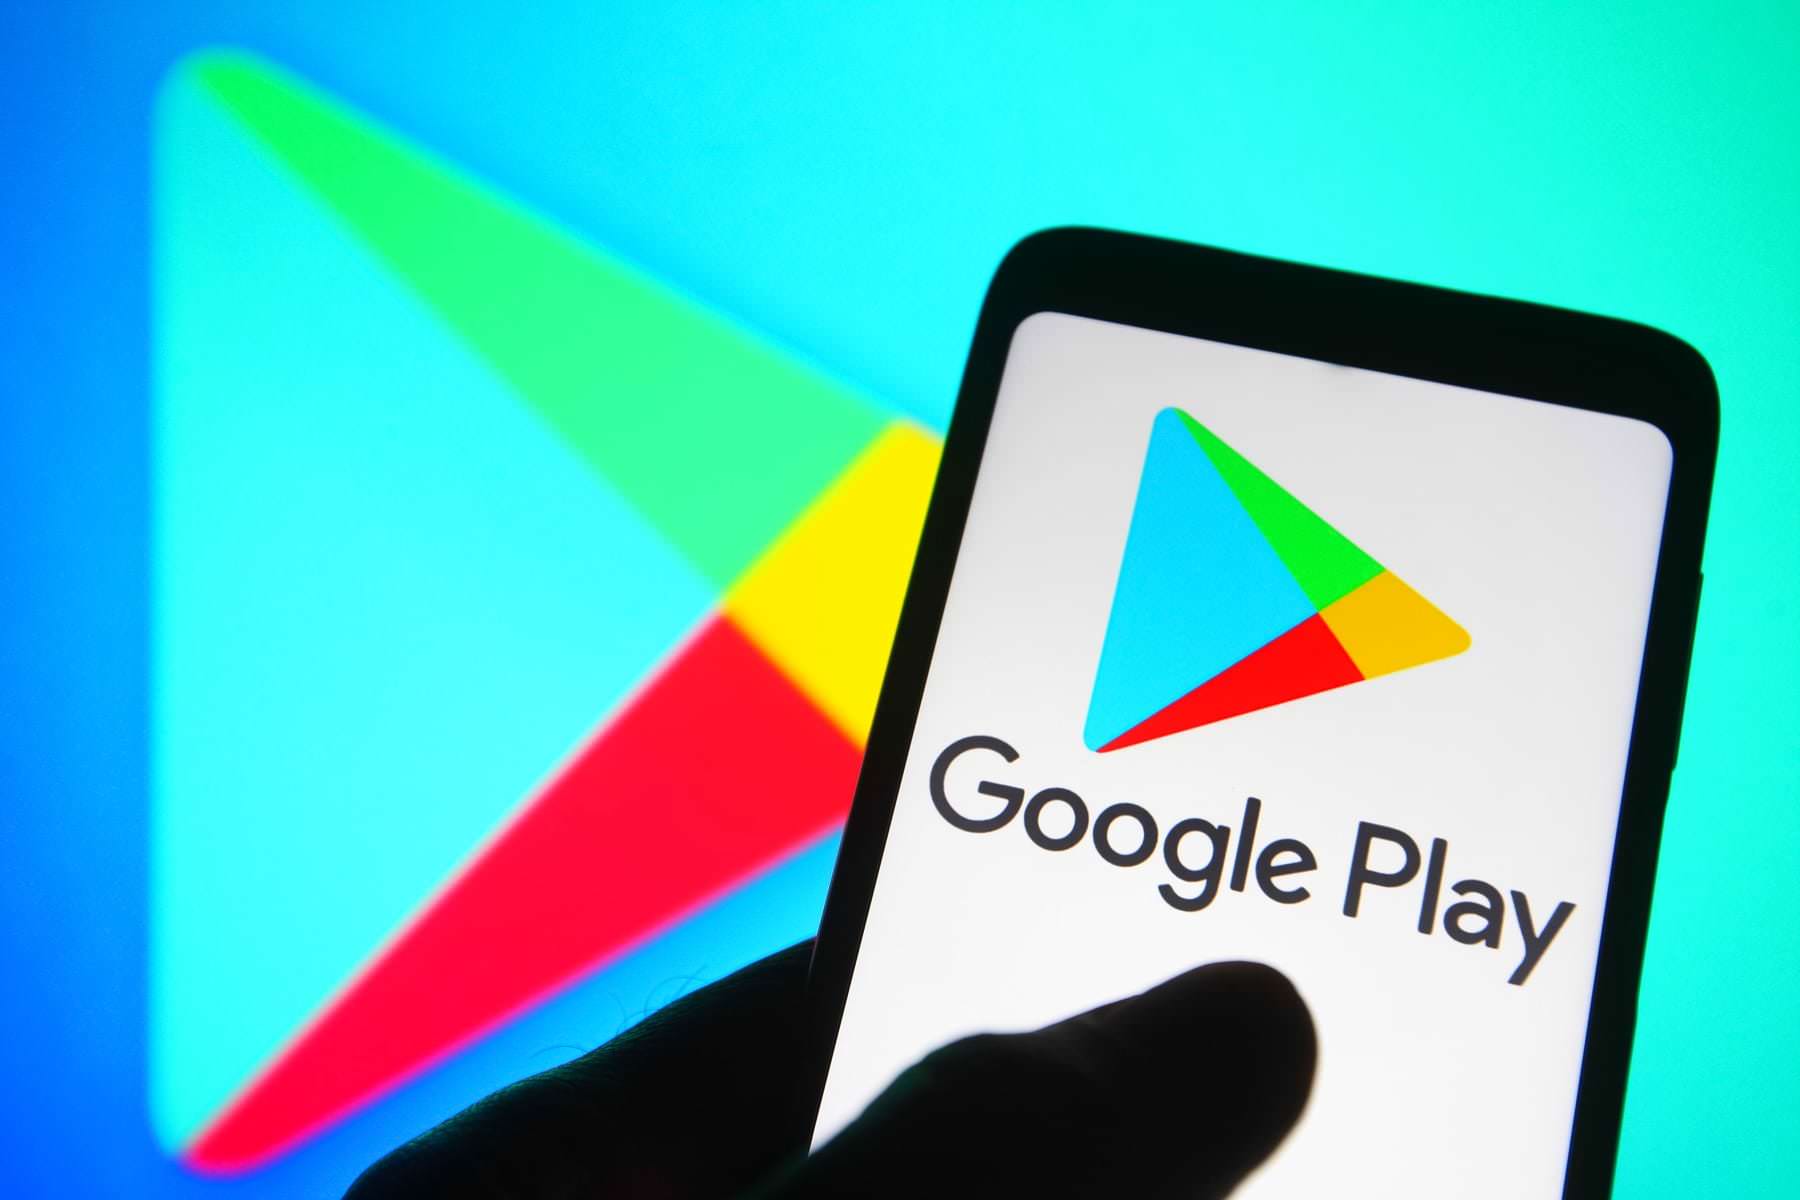 Google Play banned Russian developers from downloading and updating paid apps